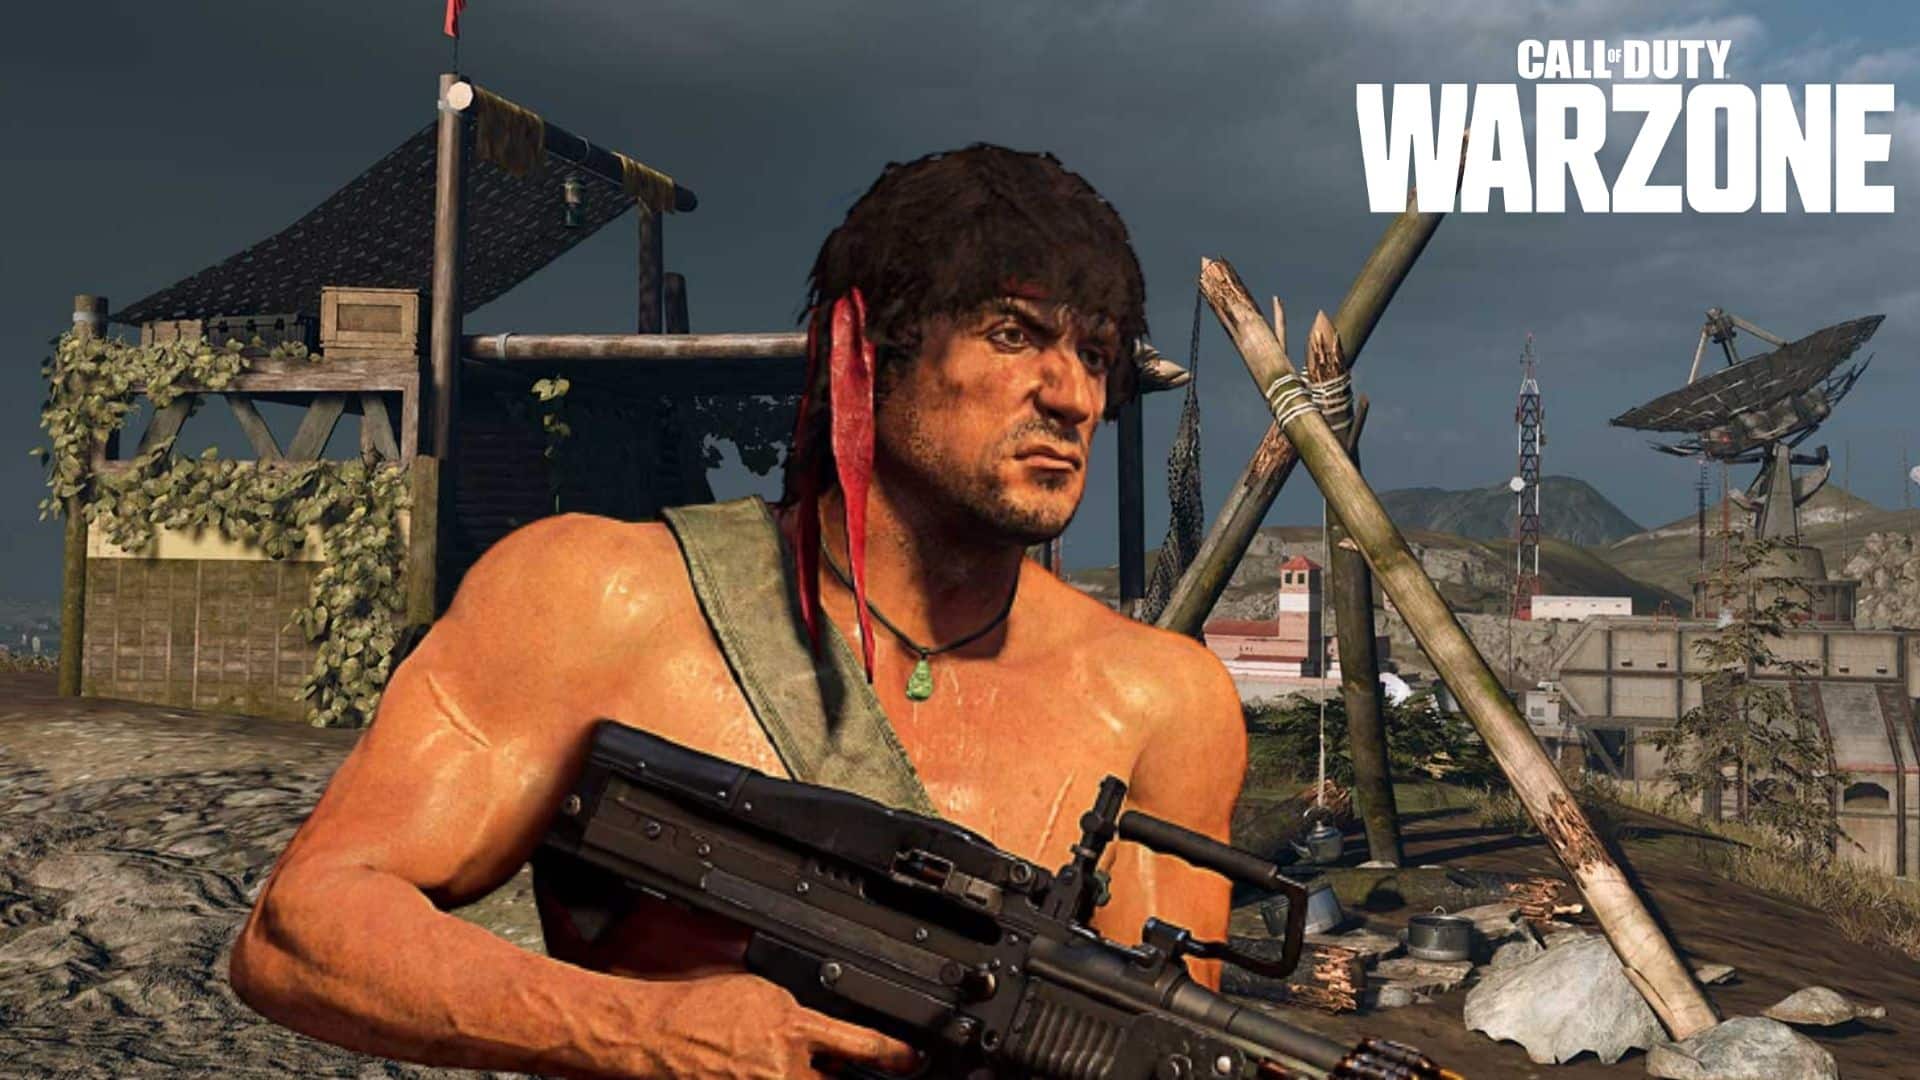 Rambo at POW Camps in Warzone